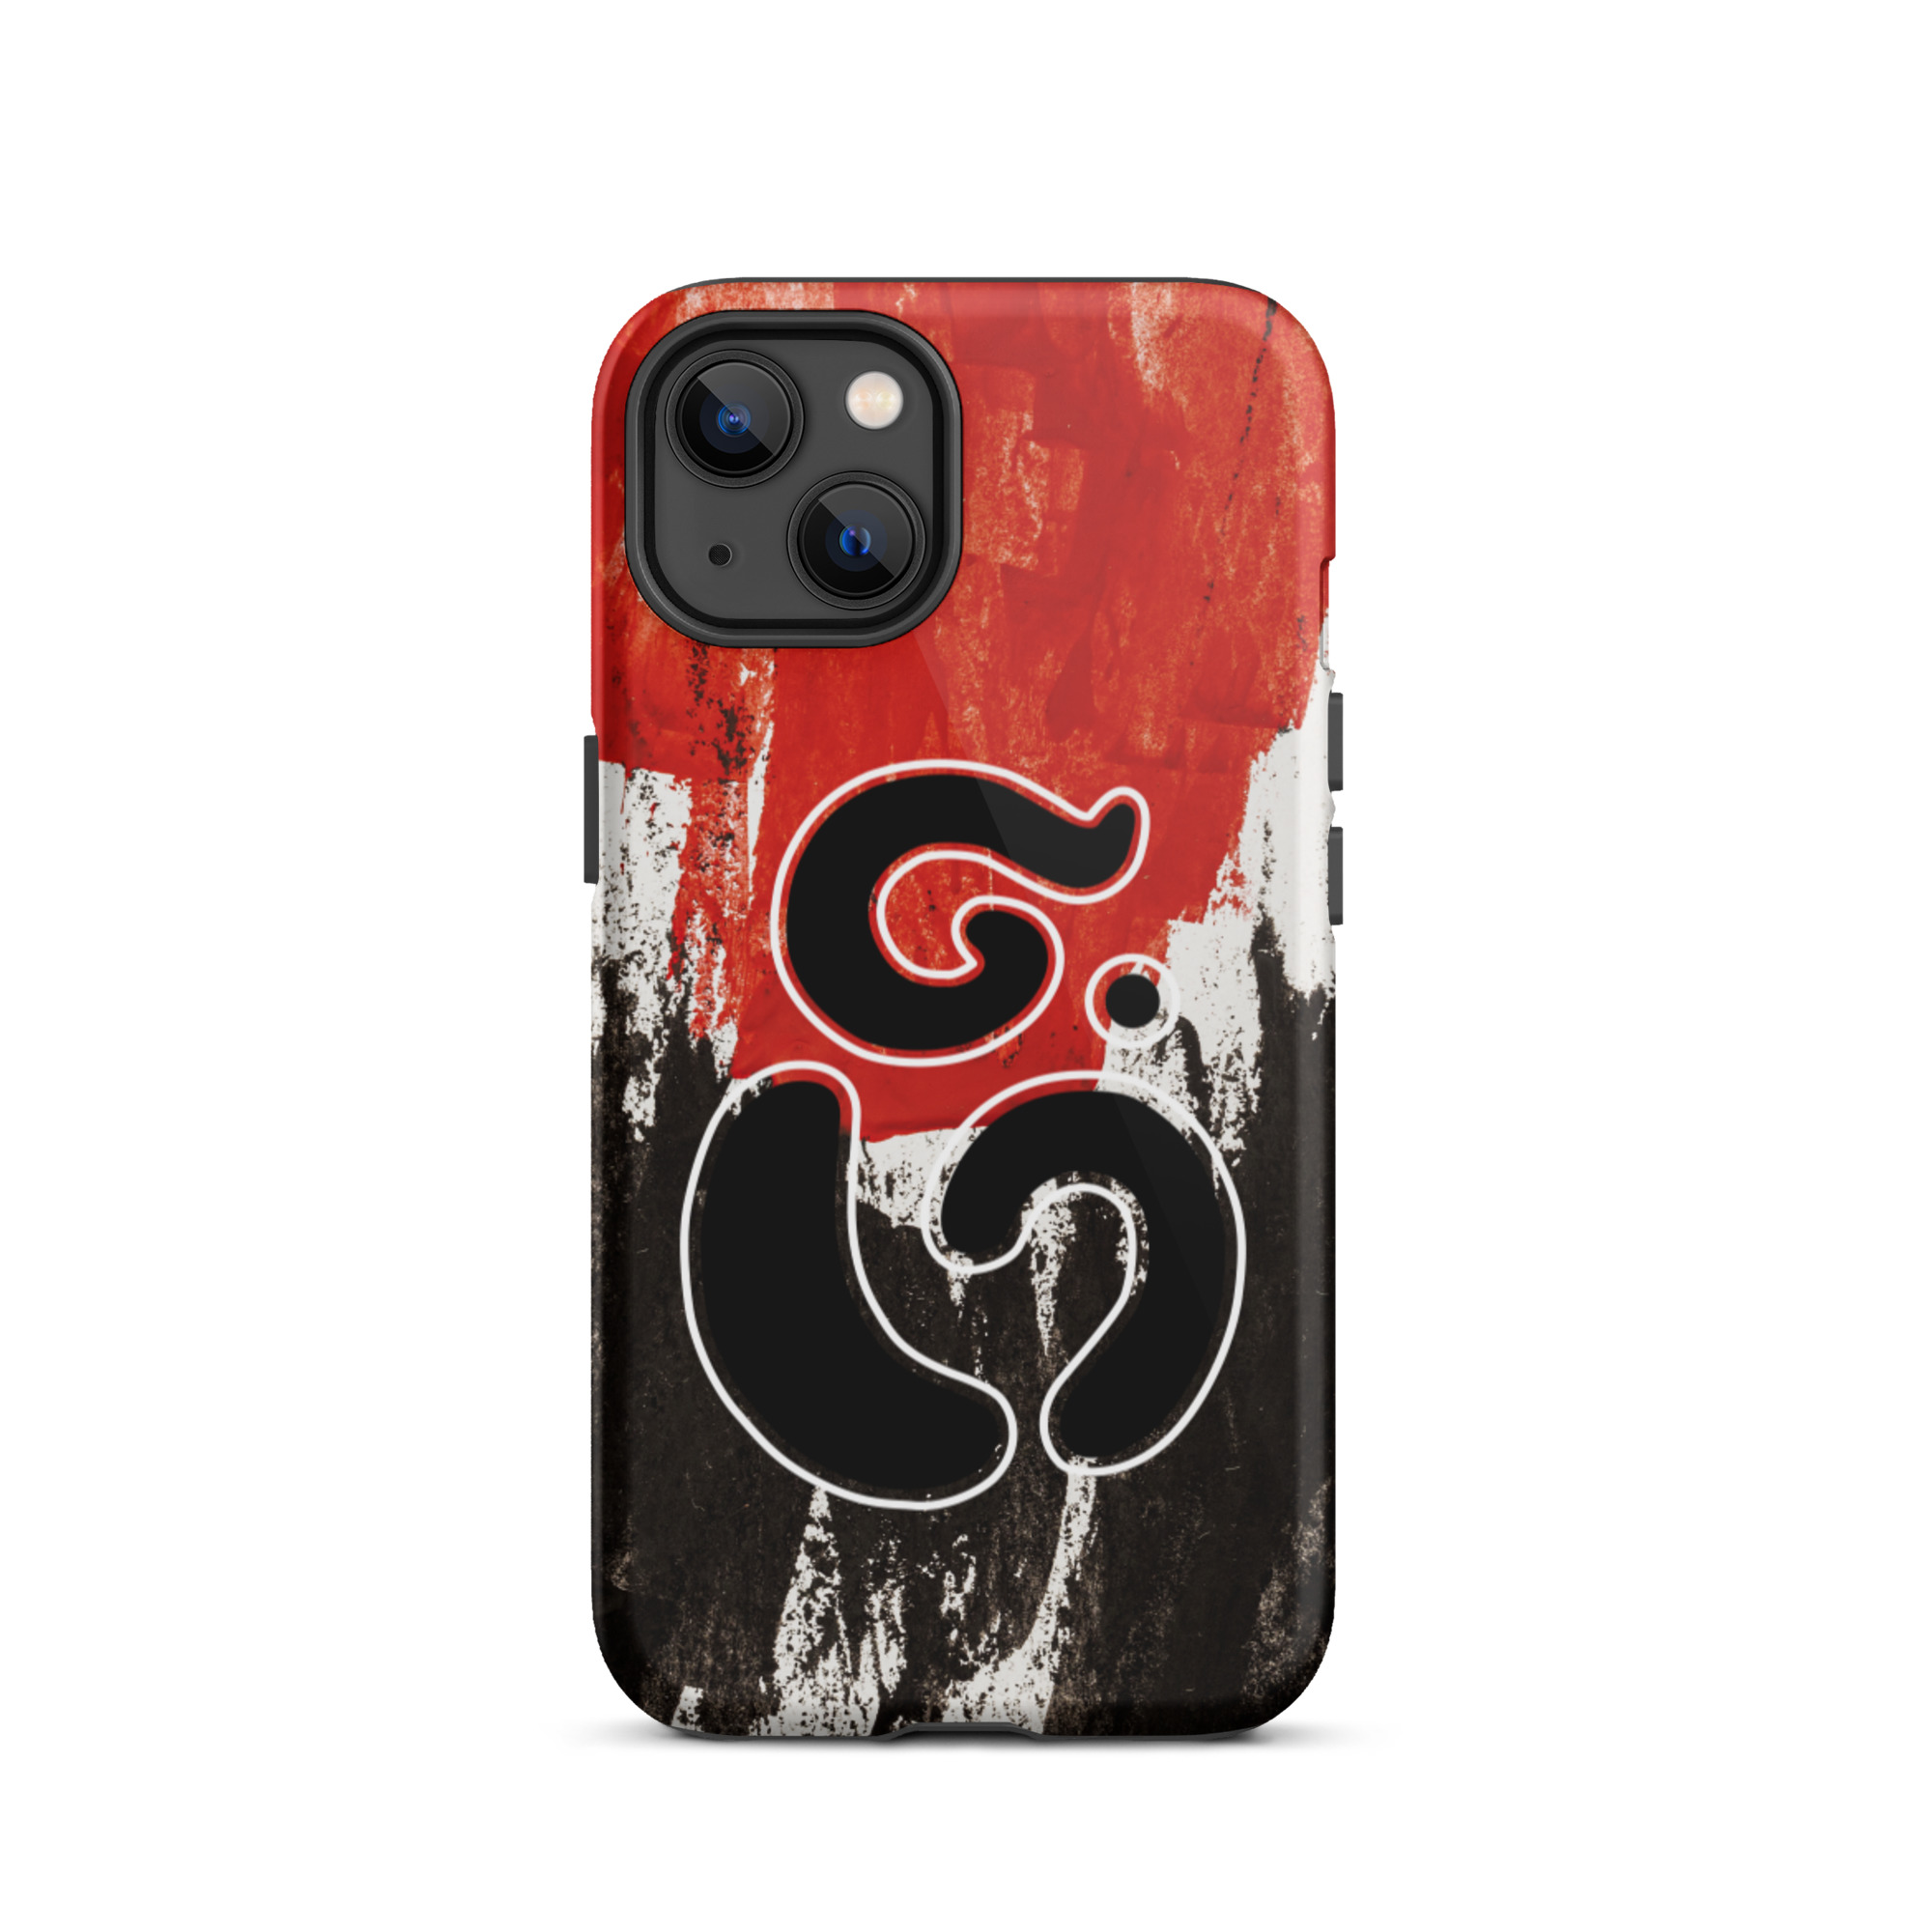 tough-iphone-case-glossy-iphone-13-front-638529f447b37-1.jpg